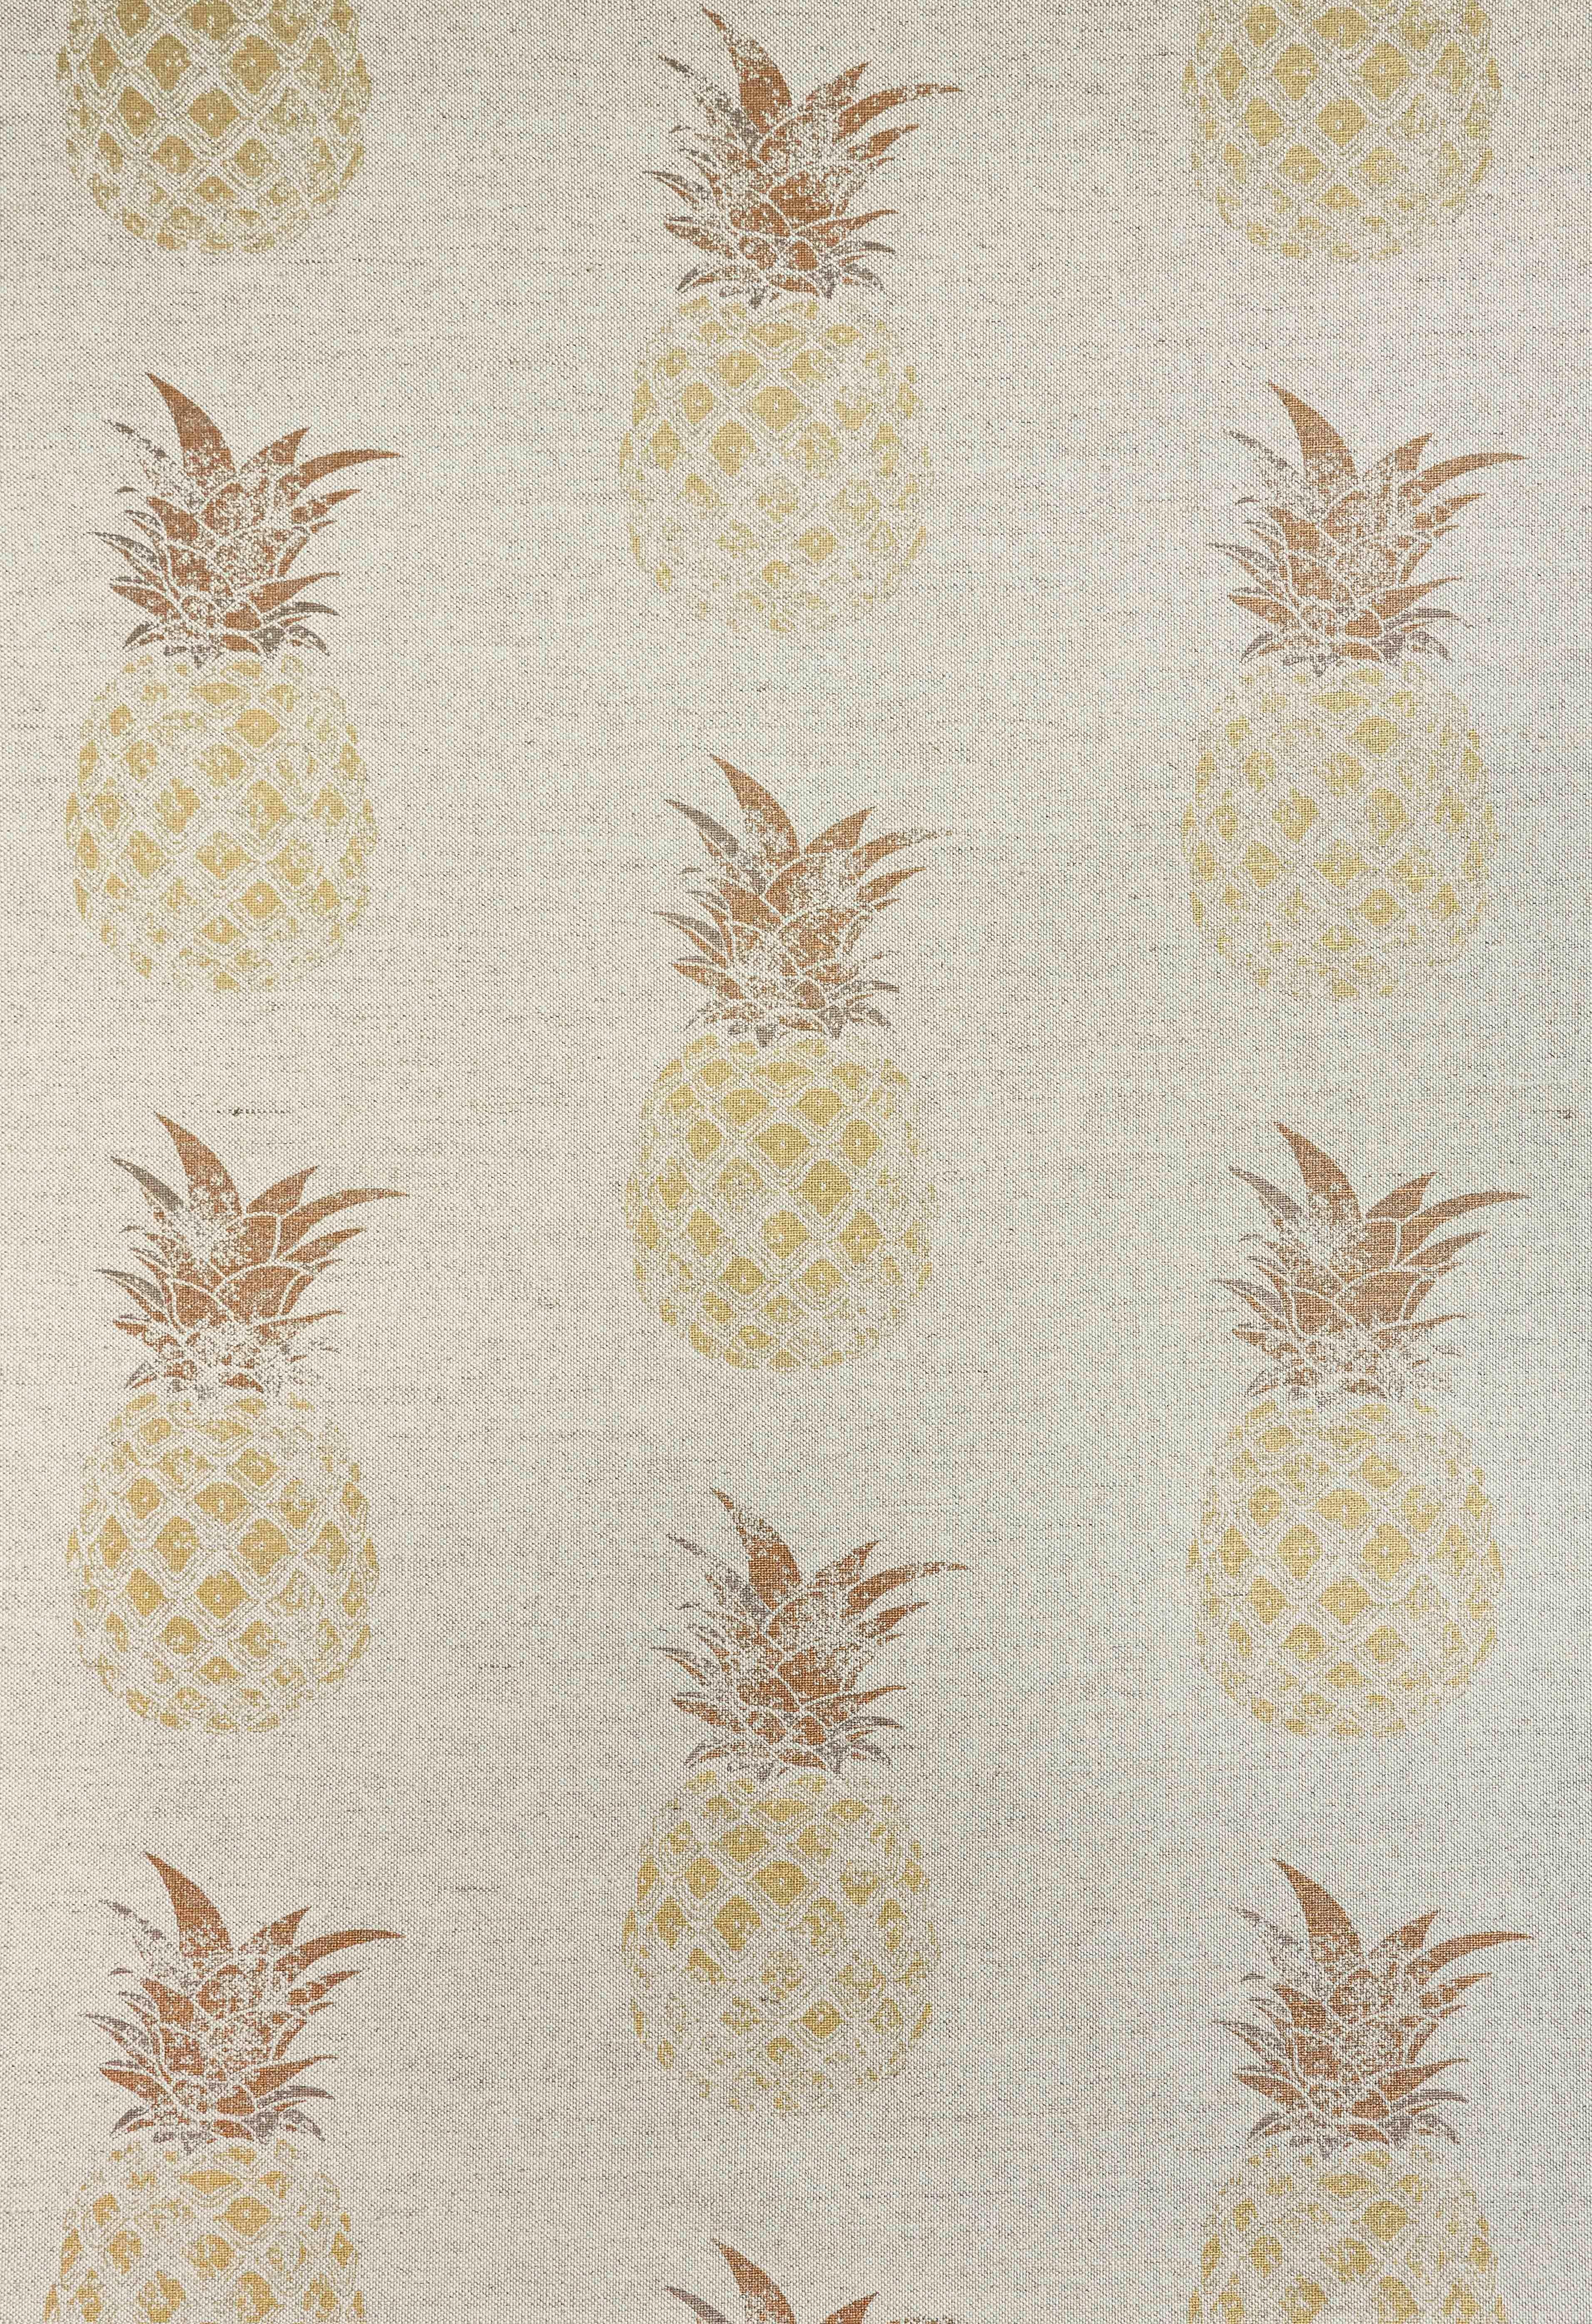 'Pineapple' Contemporary, Traditional Fabric in Pink/Red on Cream In New Condition For Sale In Pewsey, Wiltshire